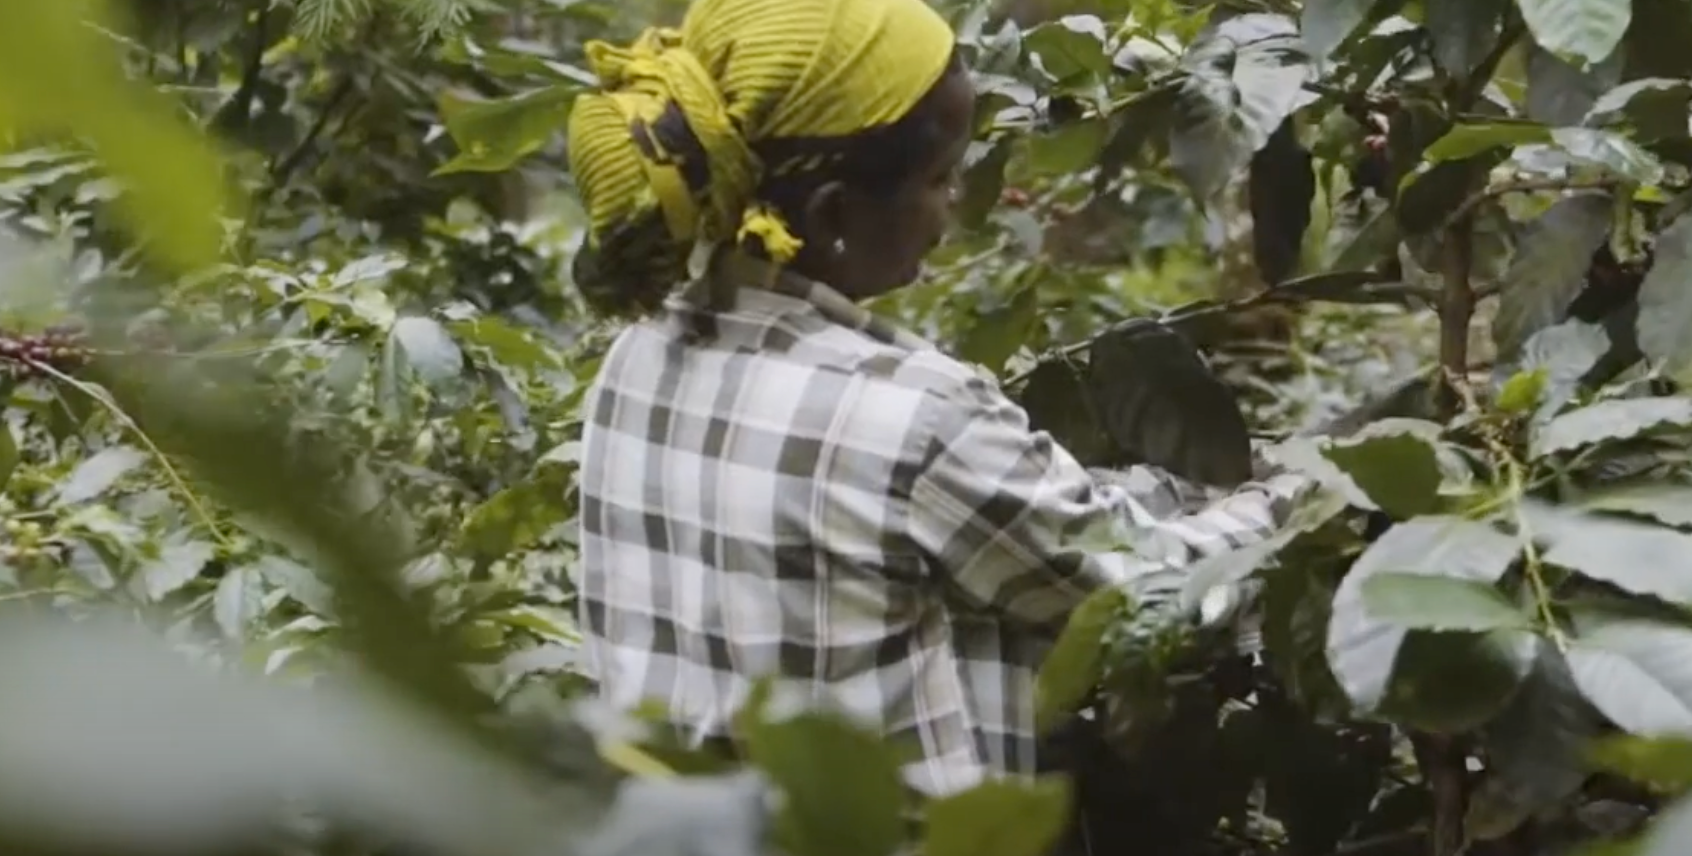 Load video: Good coffee growing practices by AFS